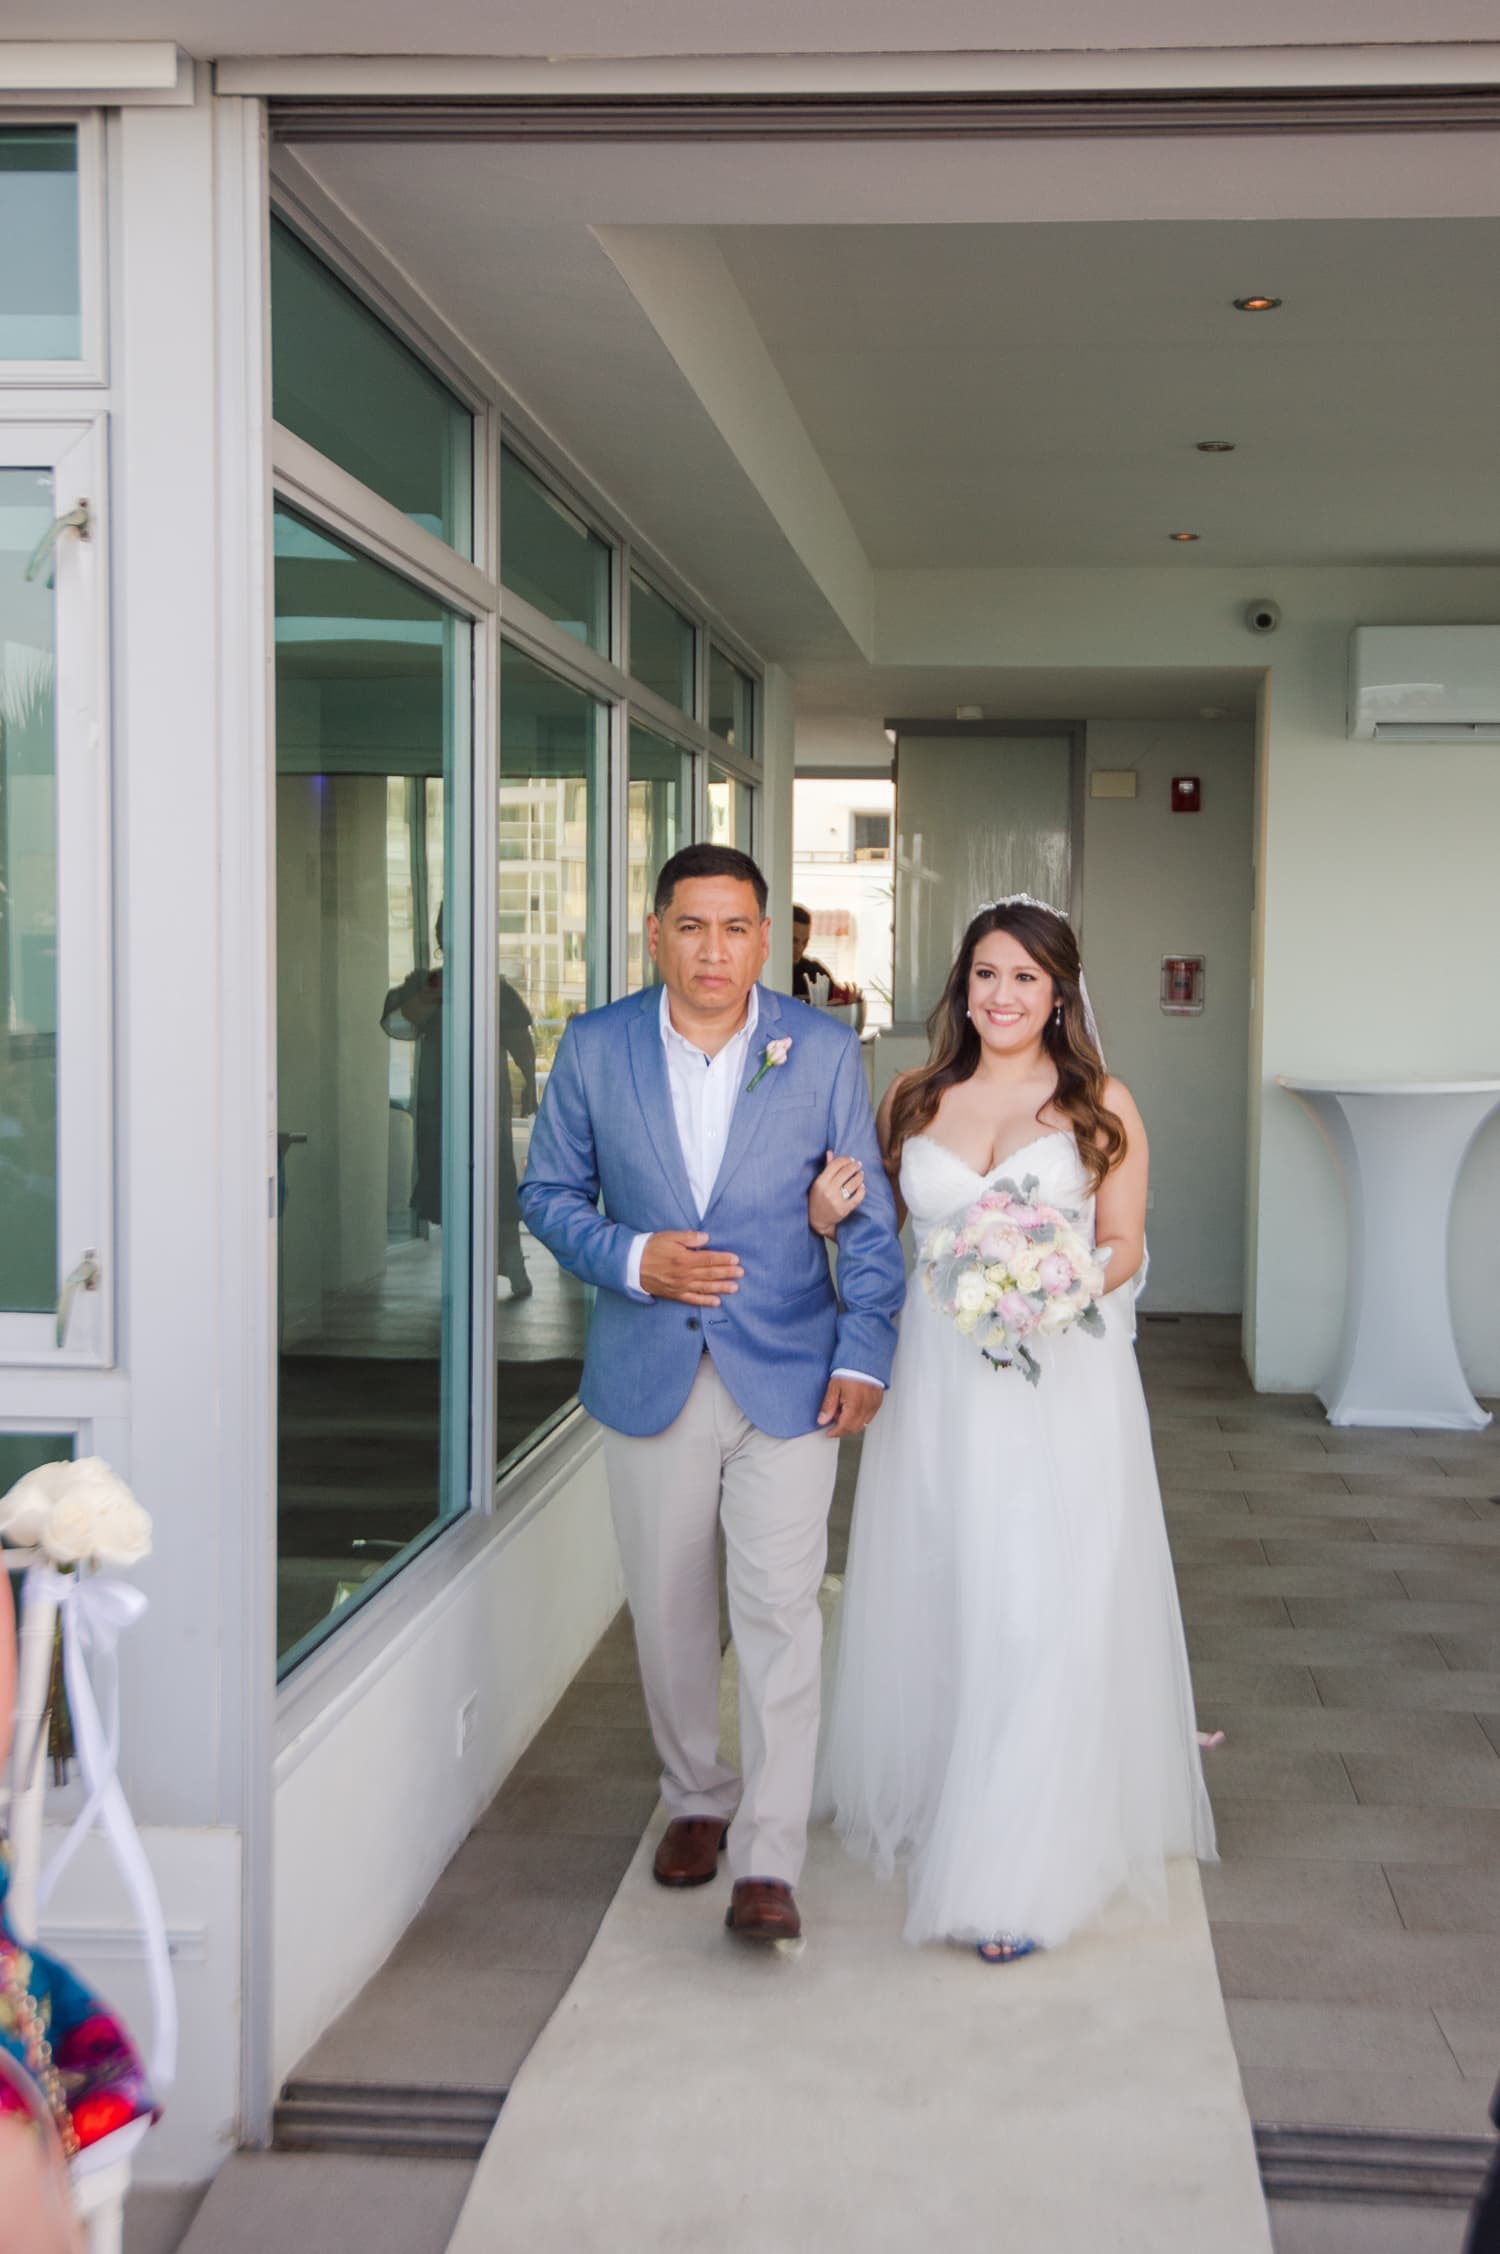 wedding ceremony and reception photography at Oceano Restaurant by Puerto Rico photographer Camille Fontanez